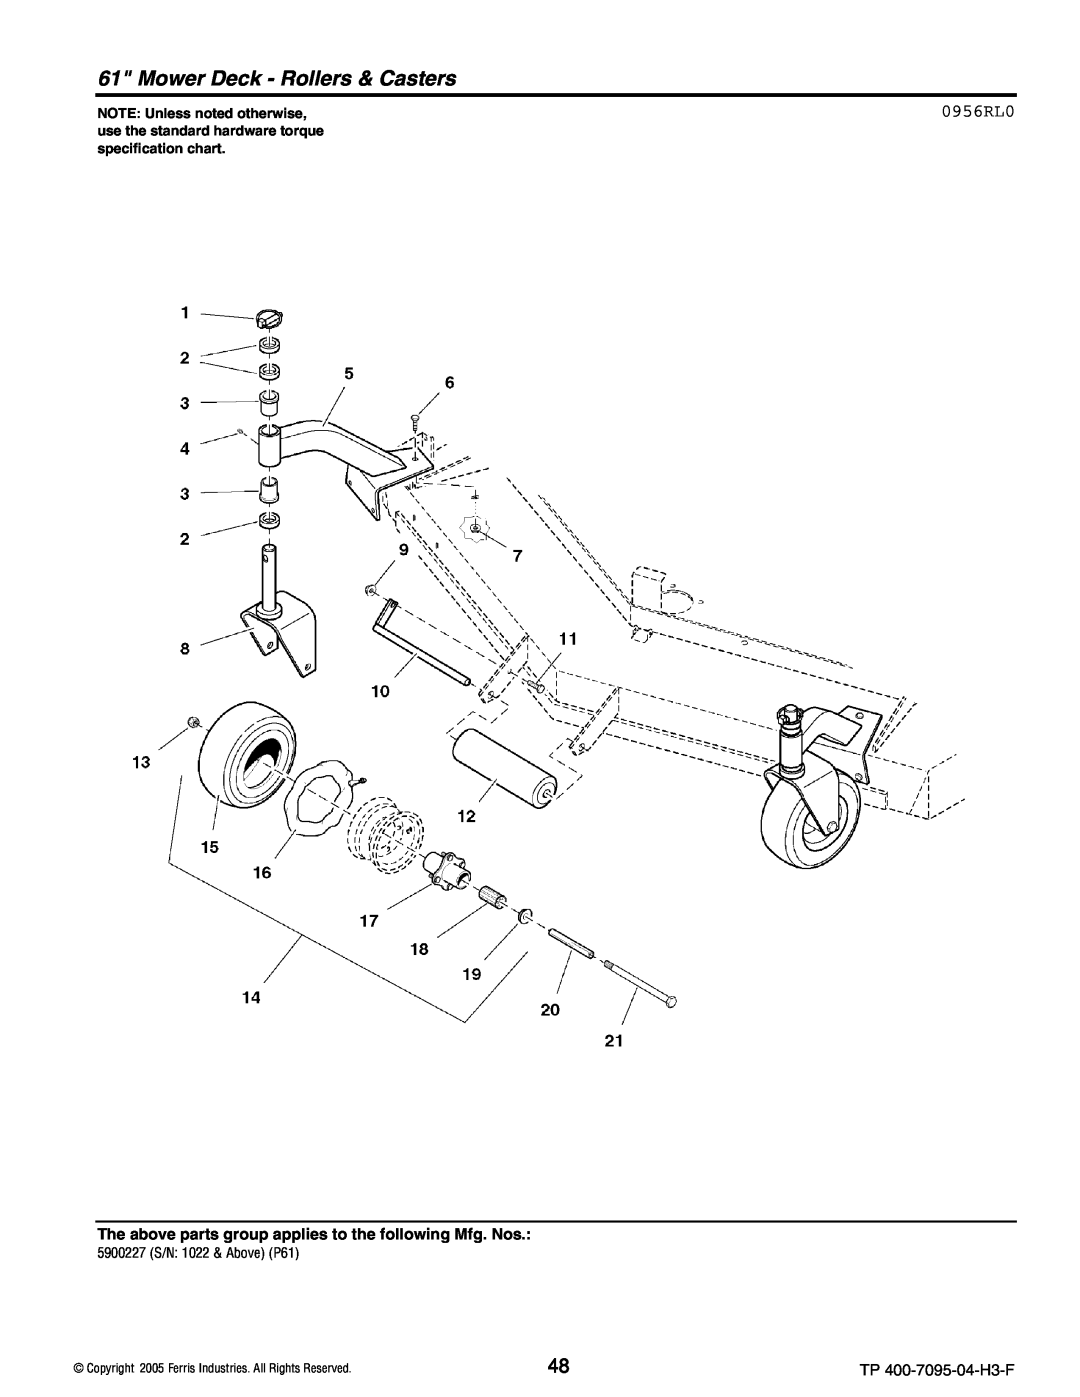 Ferris Industries 5901036, 5901035, 5900228, 5900227 Mower Deck - Rollers & Casters, 0956RL0, NOTE Unless noted otherwise 